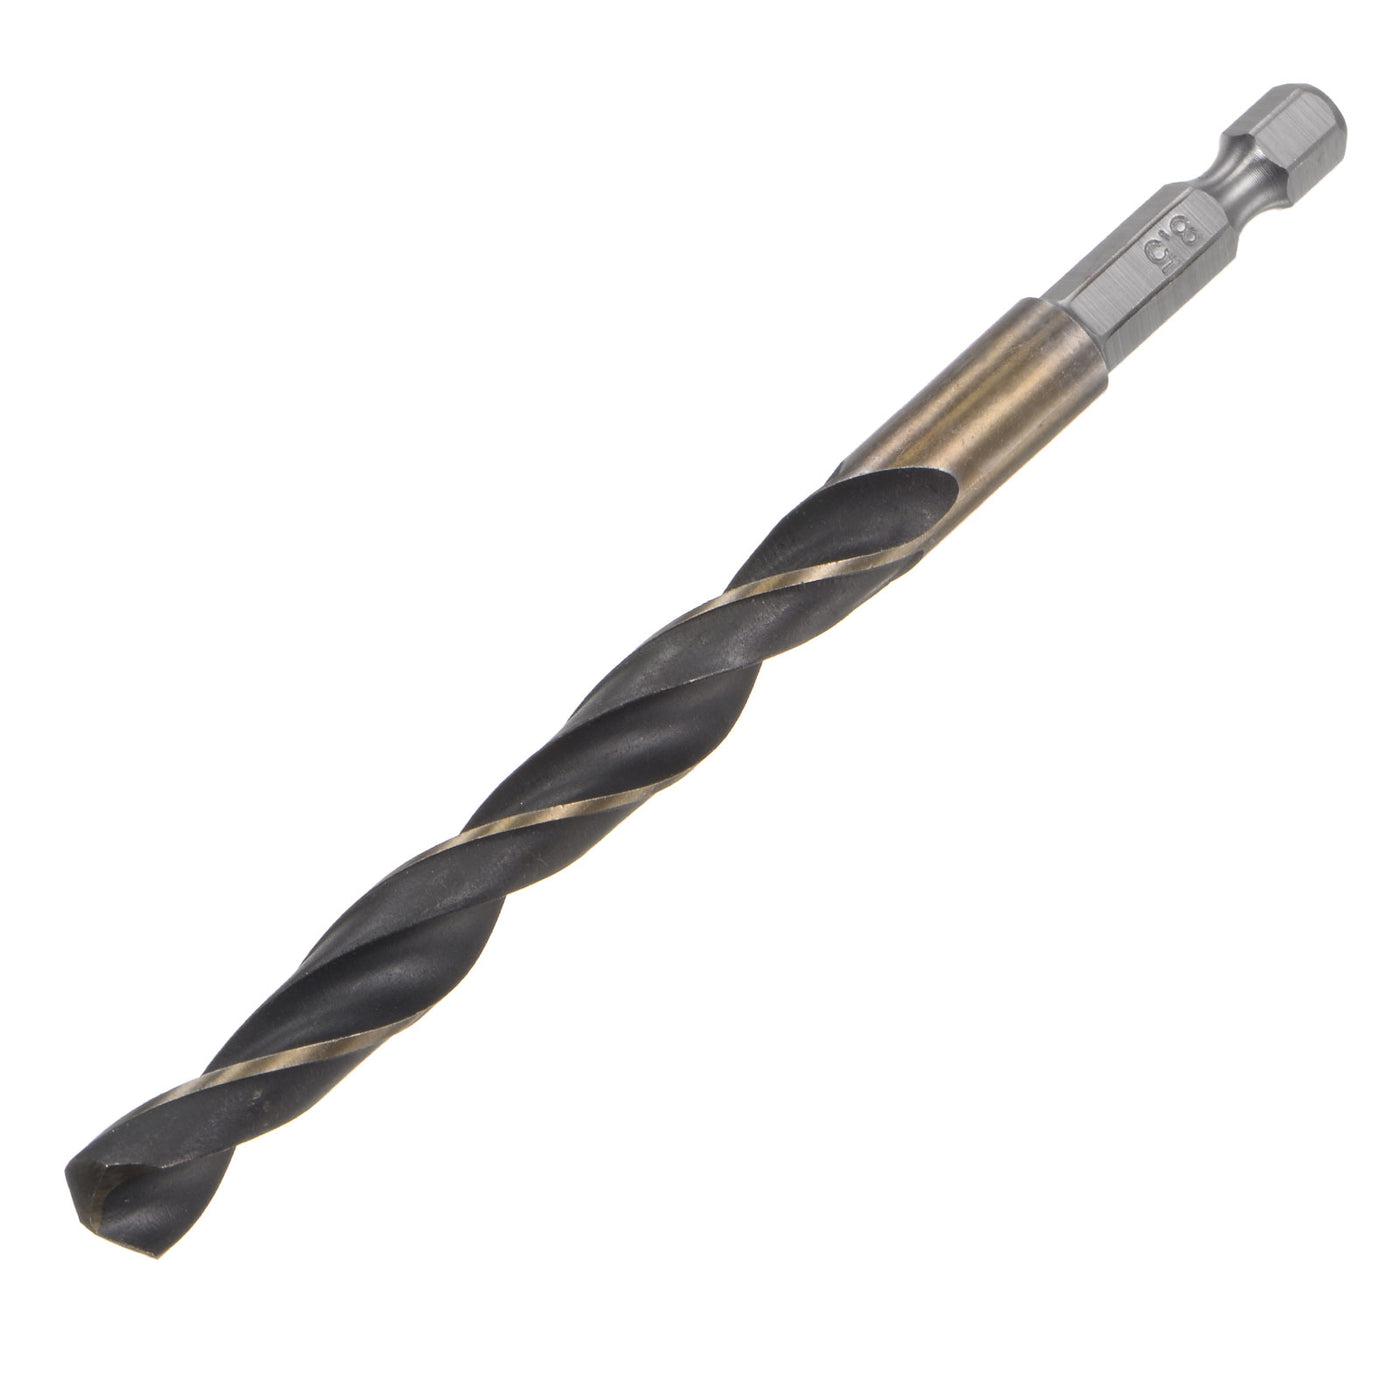 uxcell Uxcell 8.5mm High Speed Steel Twist Drill Bit with Hex Shank 117mm Length